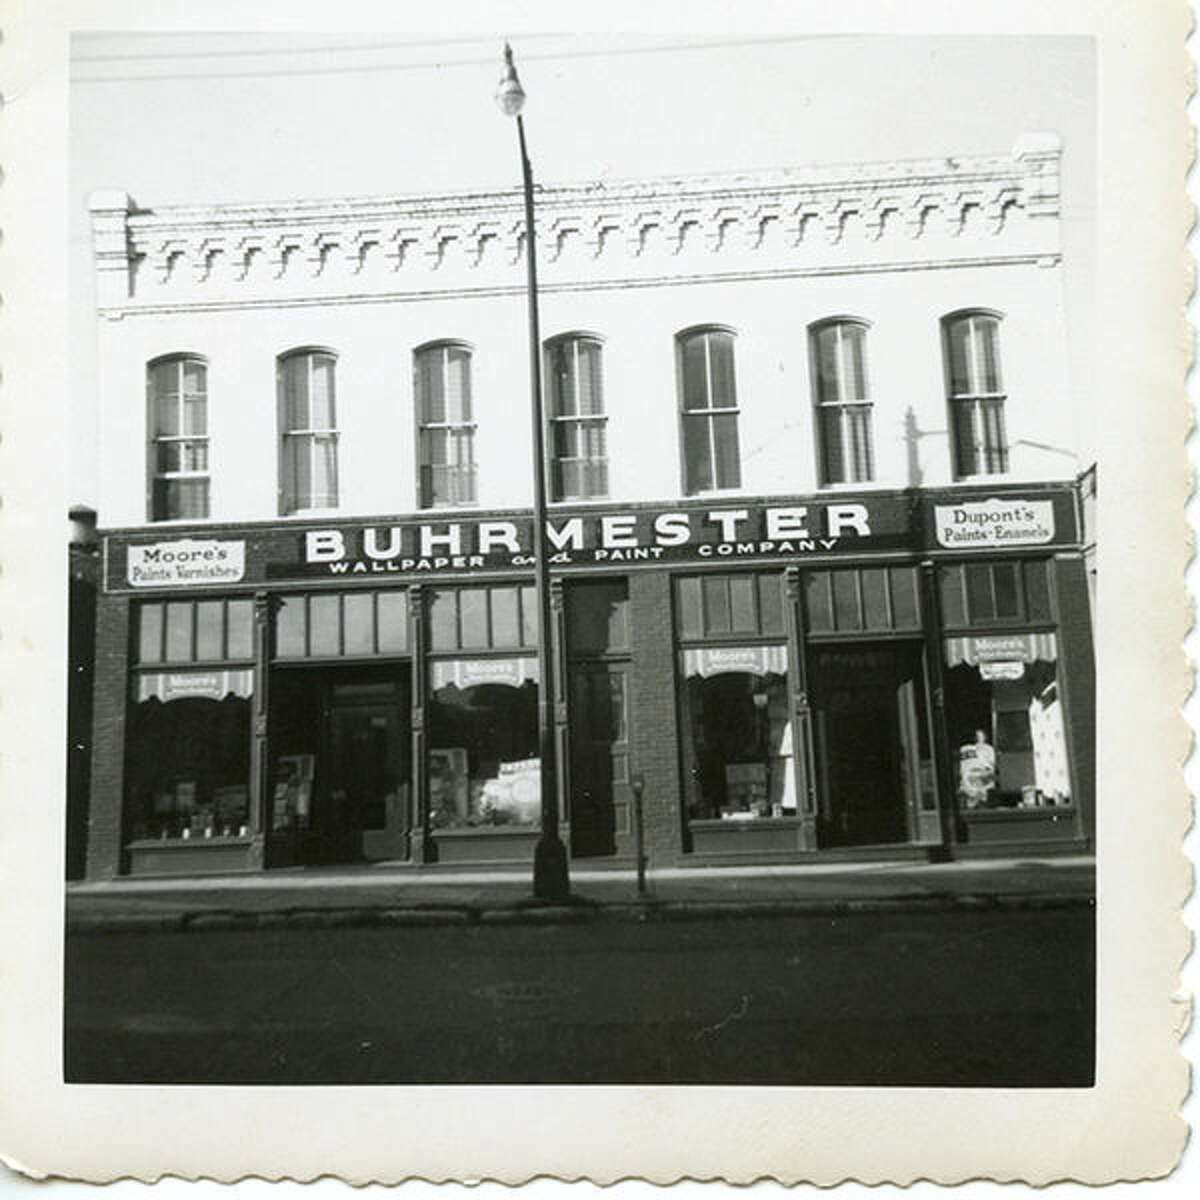 When their sign was damaged in a 2010 storm, this original Buhrmester sign was uncovered and restored. It is seen here in the 1950s.